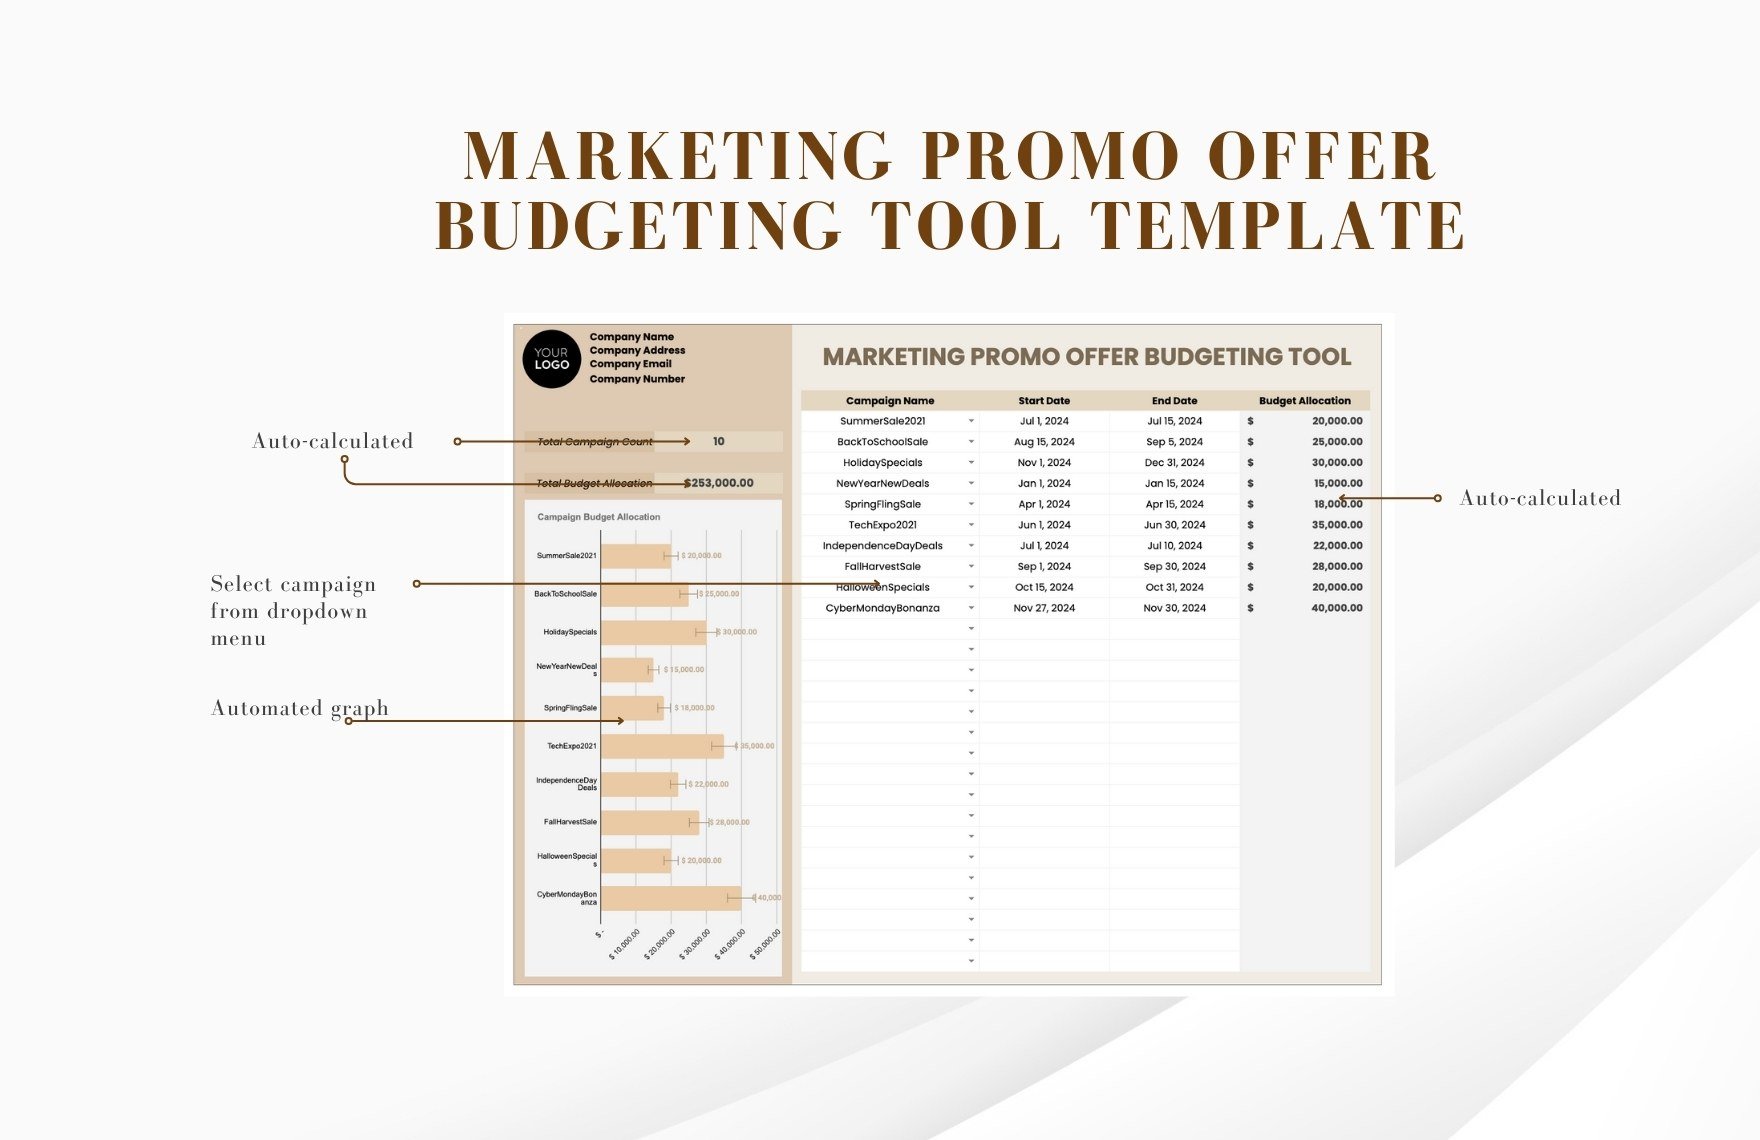 Marketing Promo Offer Budgeting Tool Template